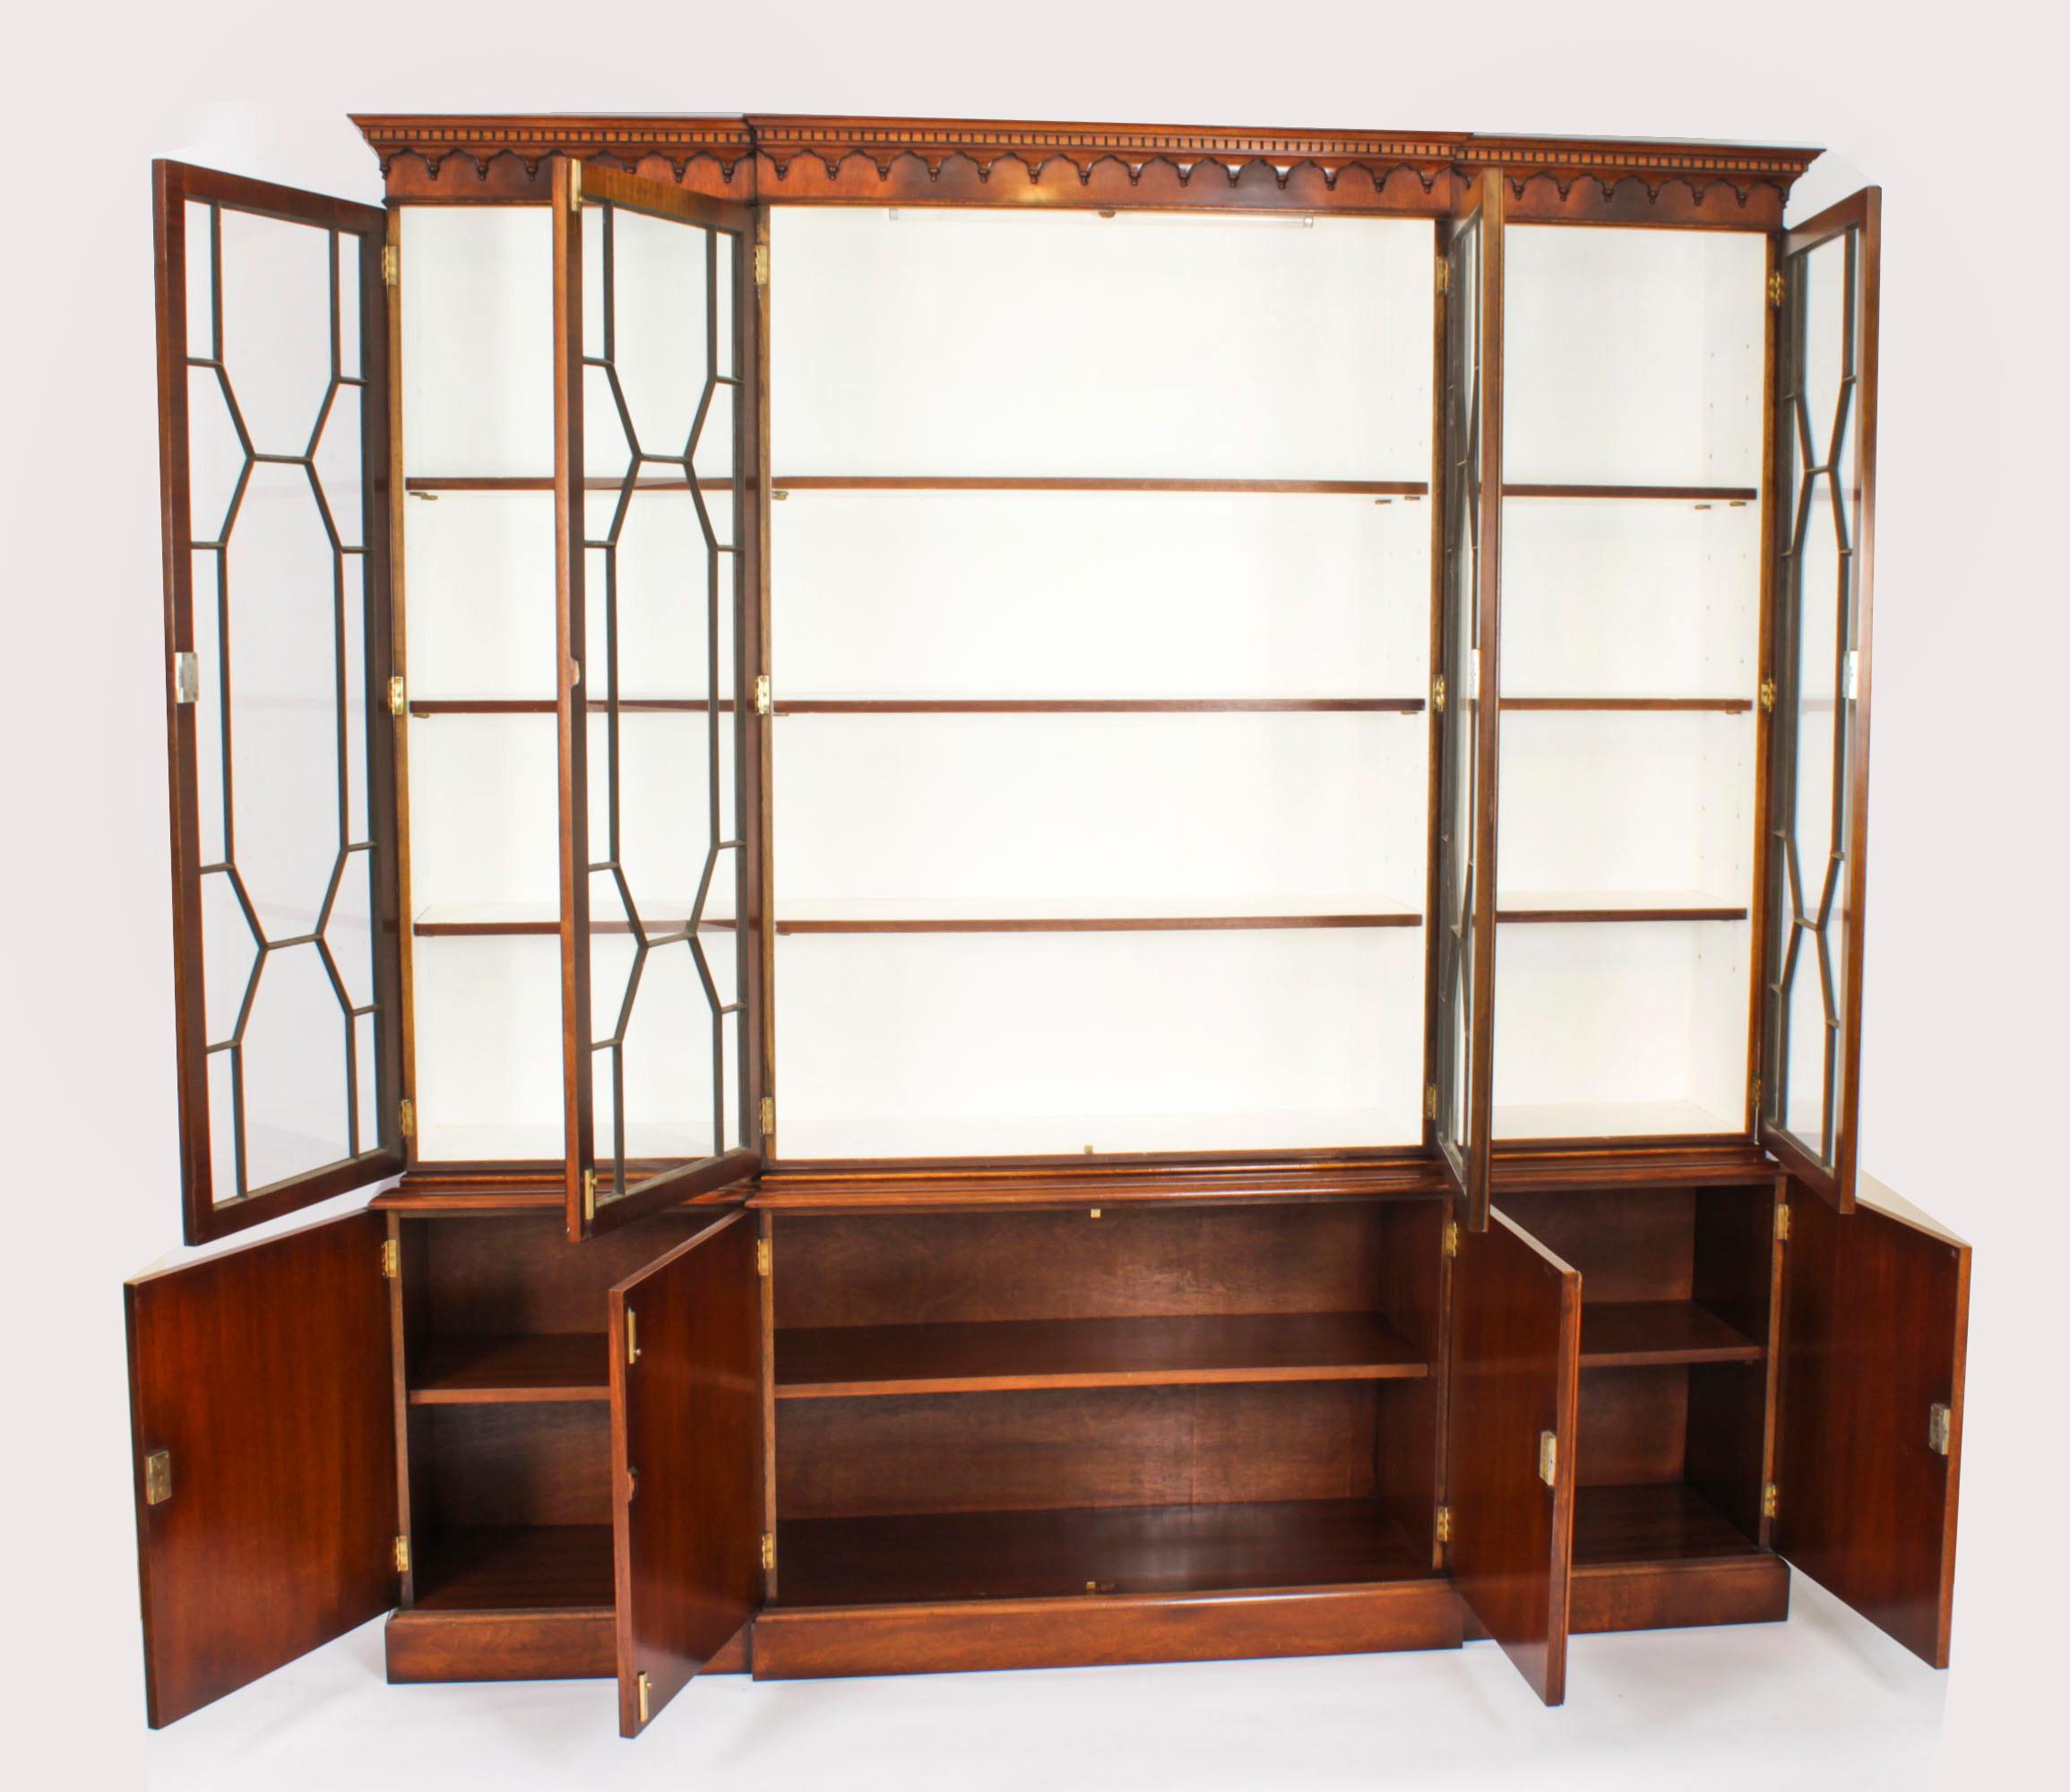 Vintage Georgian Revival Flame Mahogany Breakfront Bookcase 20th Century For Sale 8